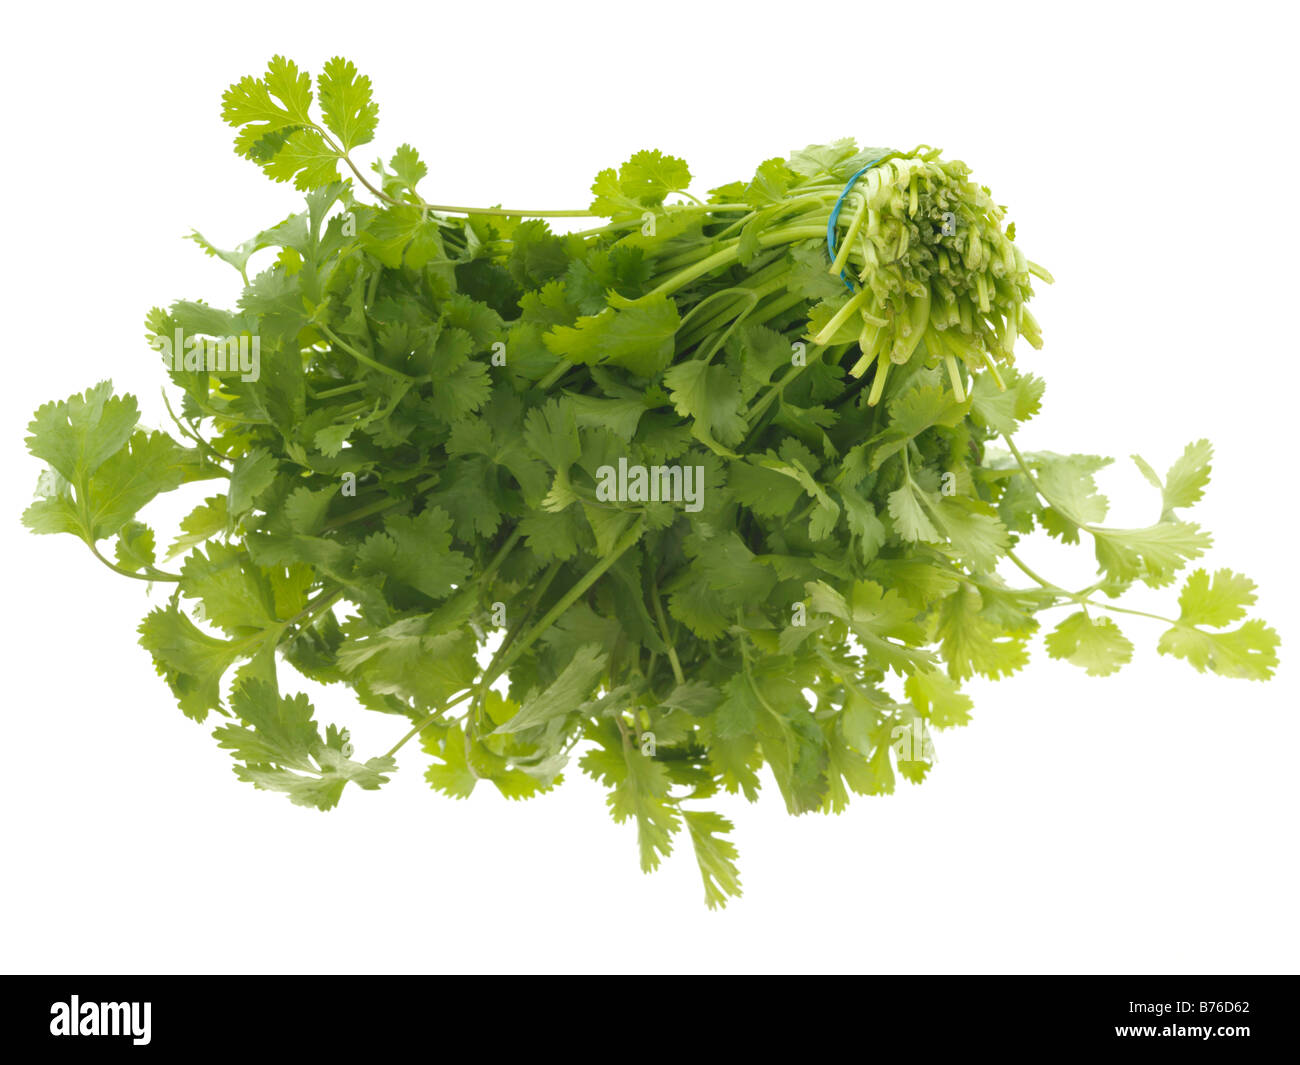 Fresh Healthy Bunch Of Ripe Aromatic Flat Leaf Parsley Cooking Ingredient Isolated Against A White Background With No People And A Clipping Path Stock Photo